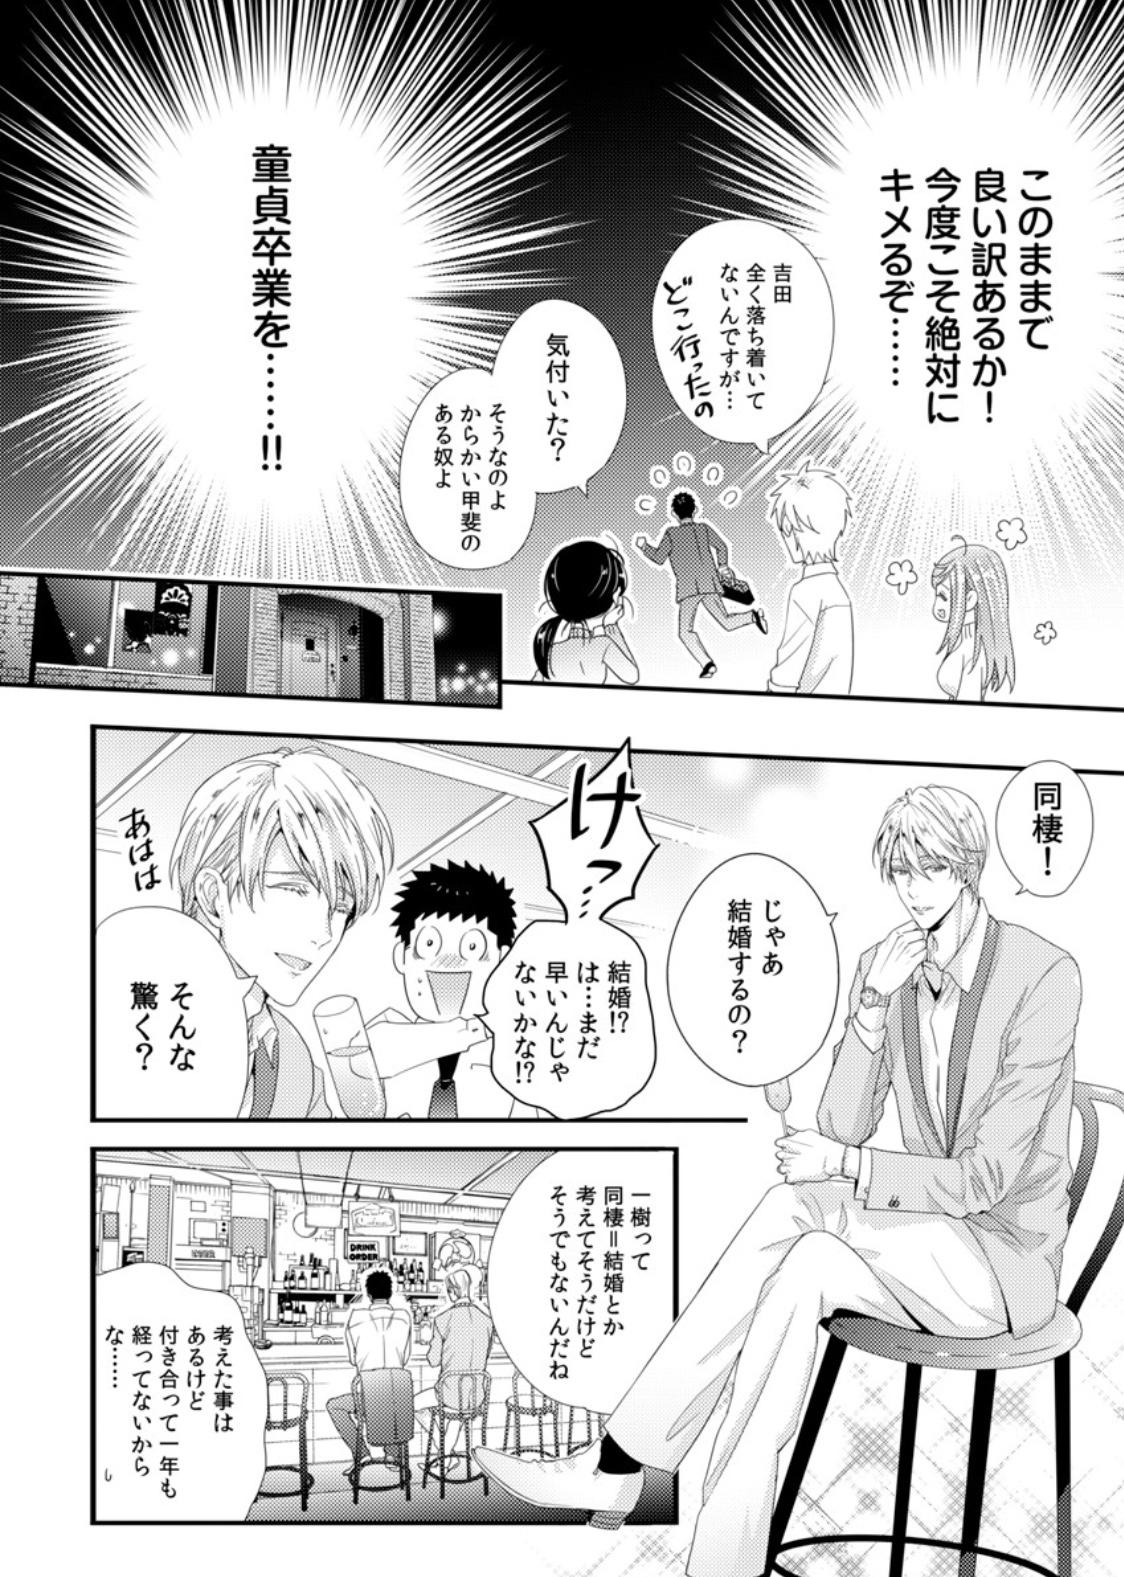 Please Let Me Hold You Futaba-San! Ch. 1-4 86